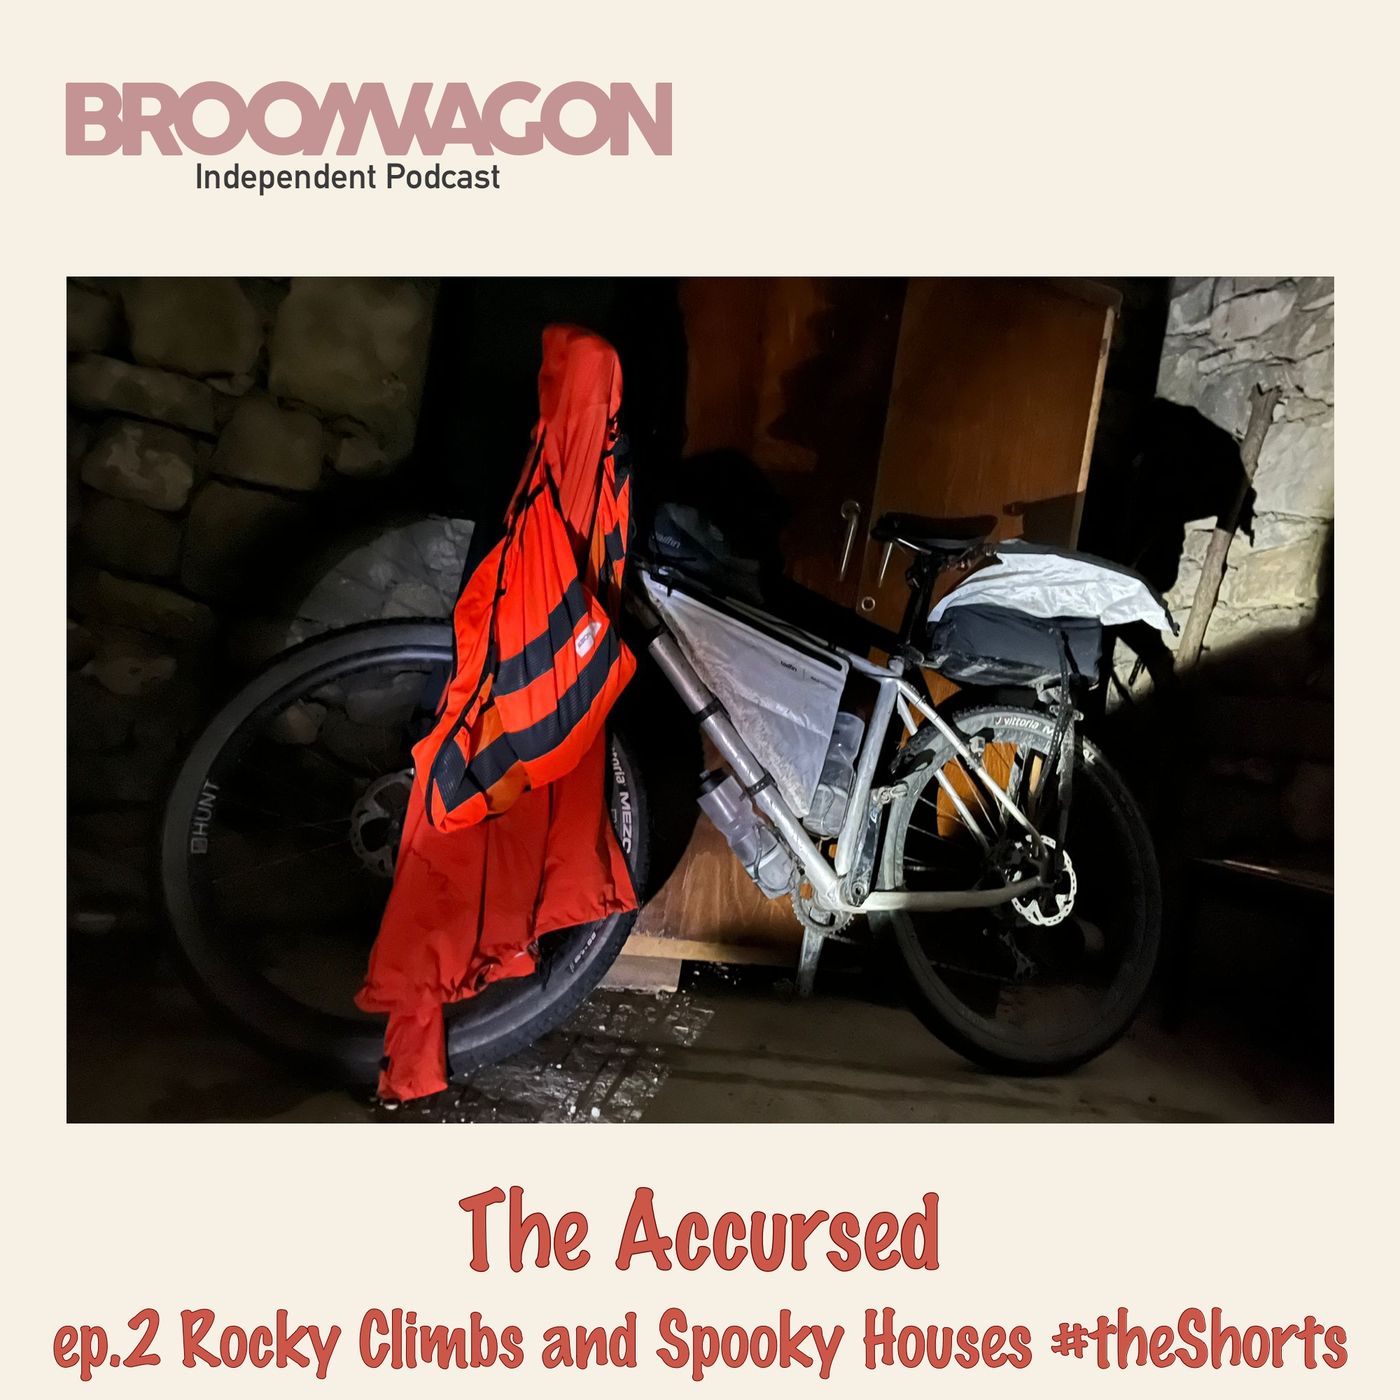 The Accursed ep.2 Rocky Climbs and Spooky Houses #theShorts